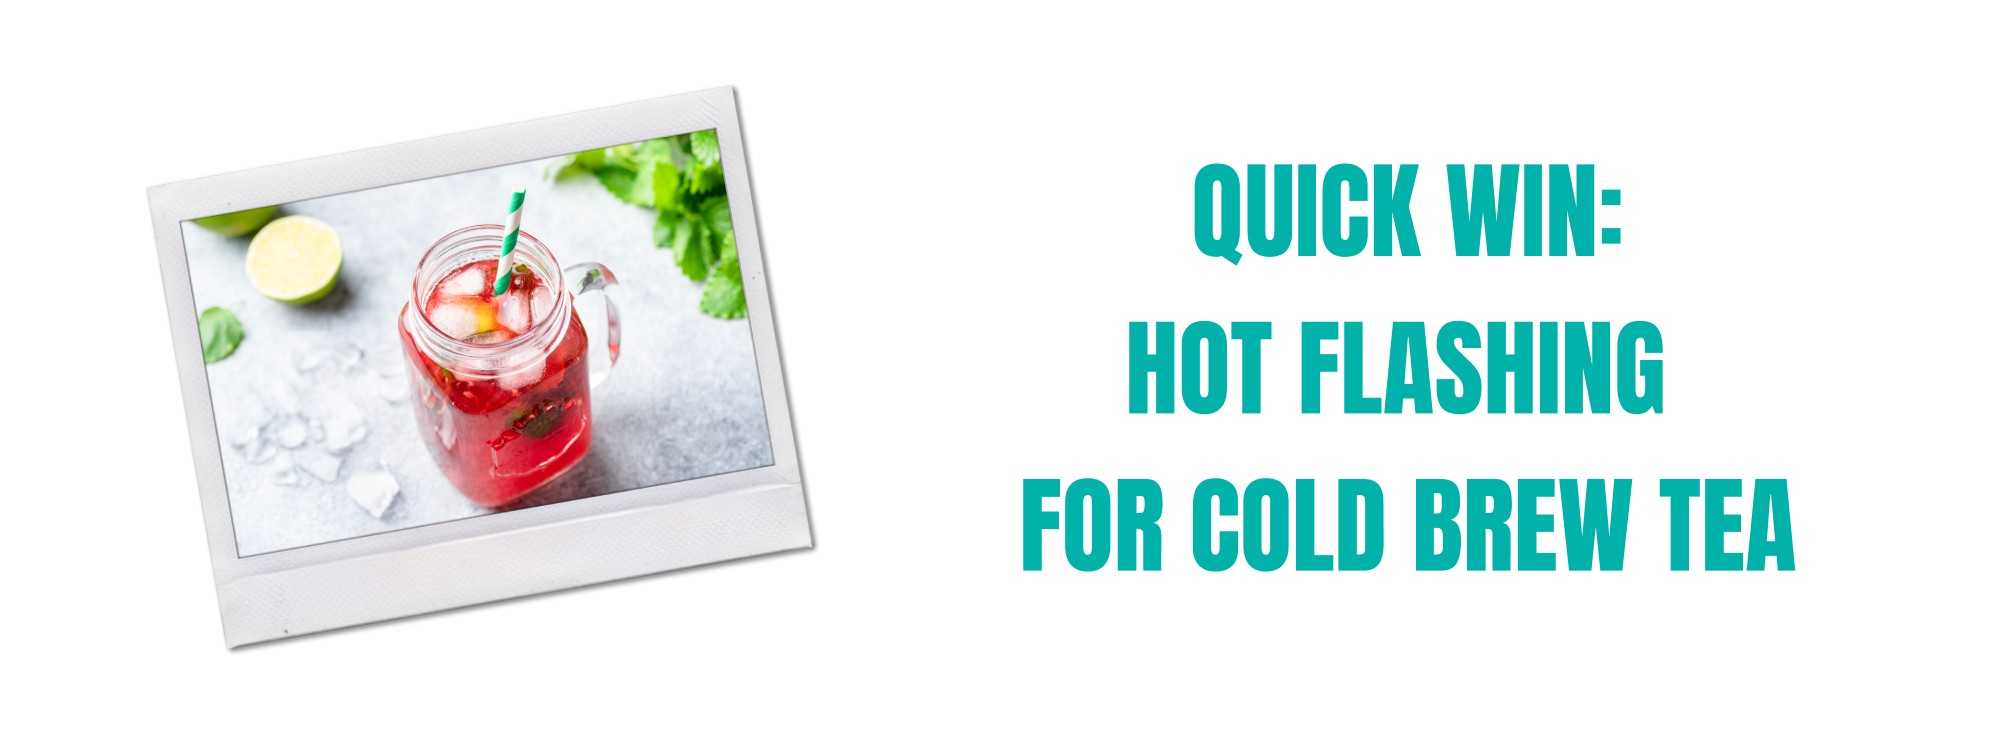 Quick Win: Hot Flashing for Cold Brew Tea